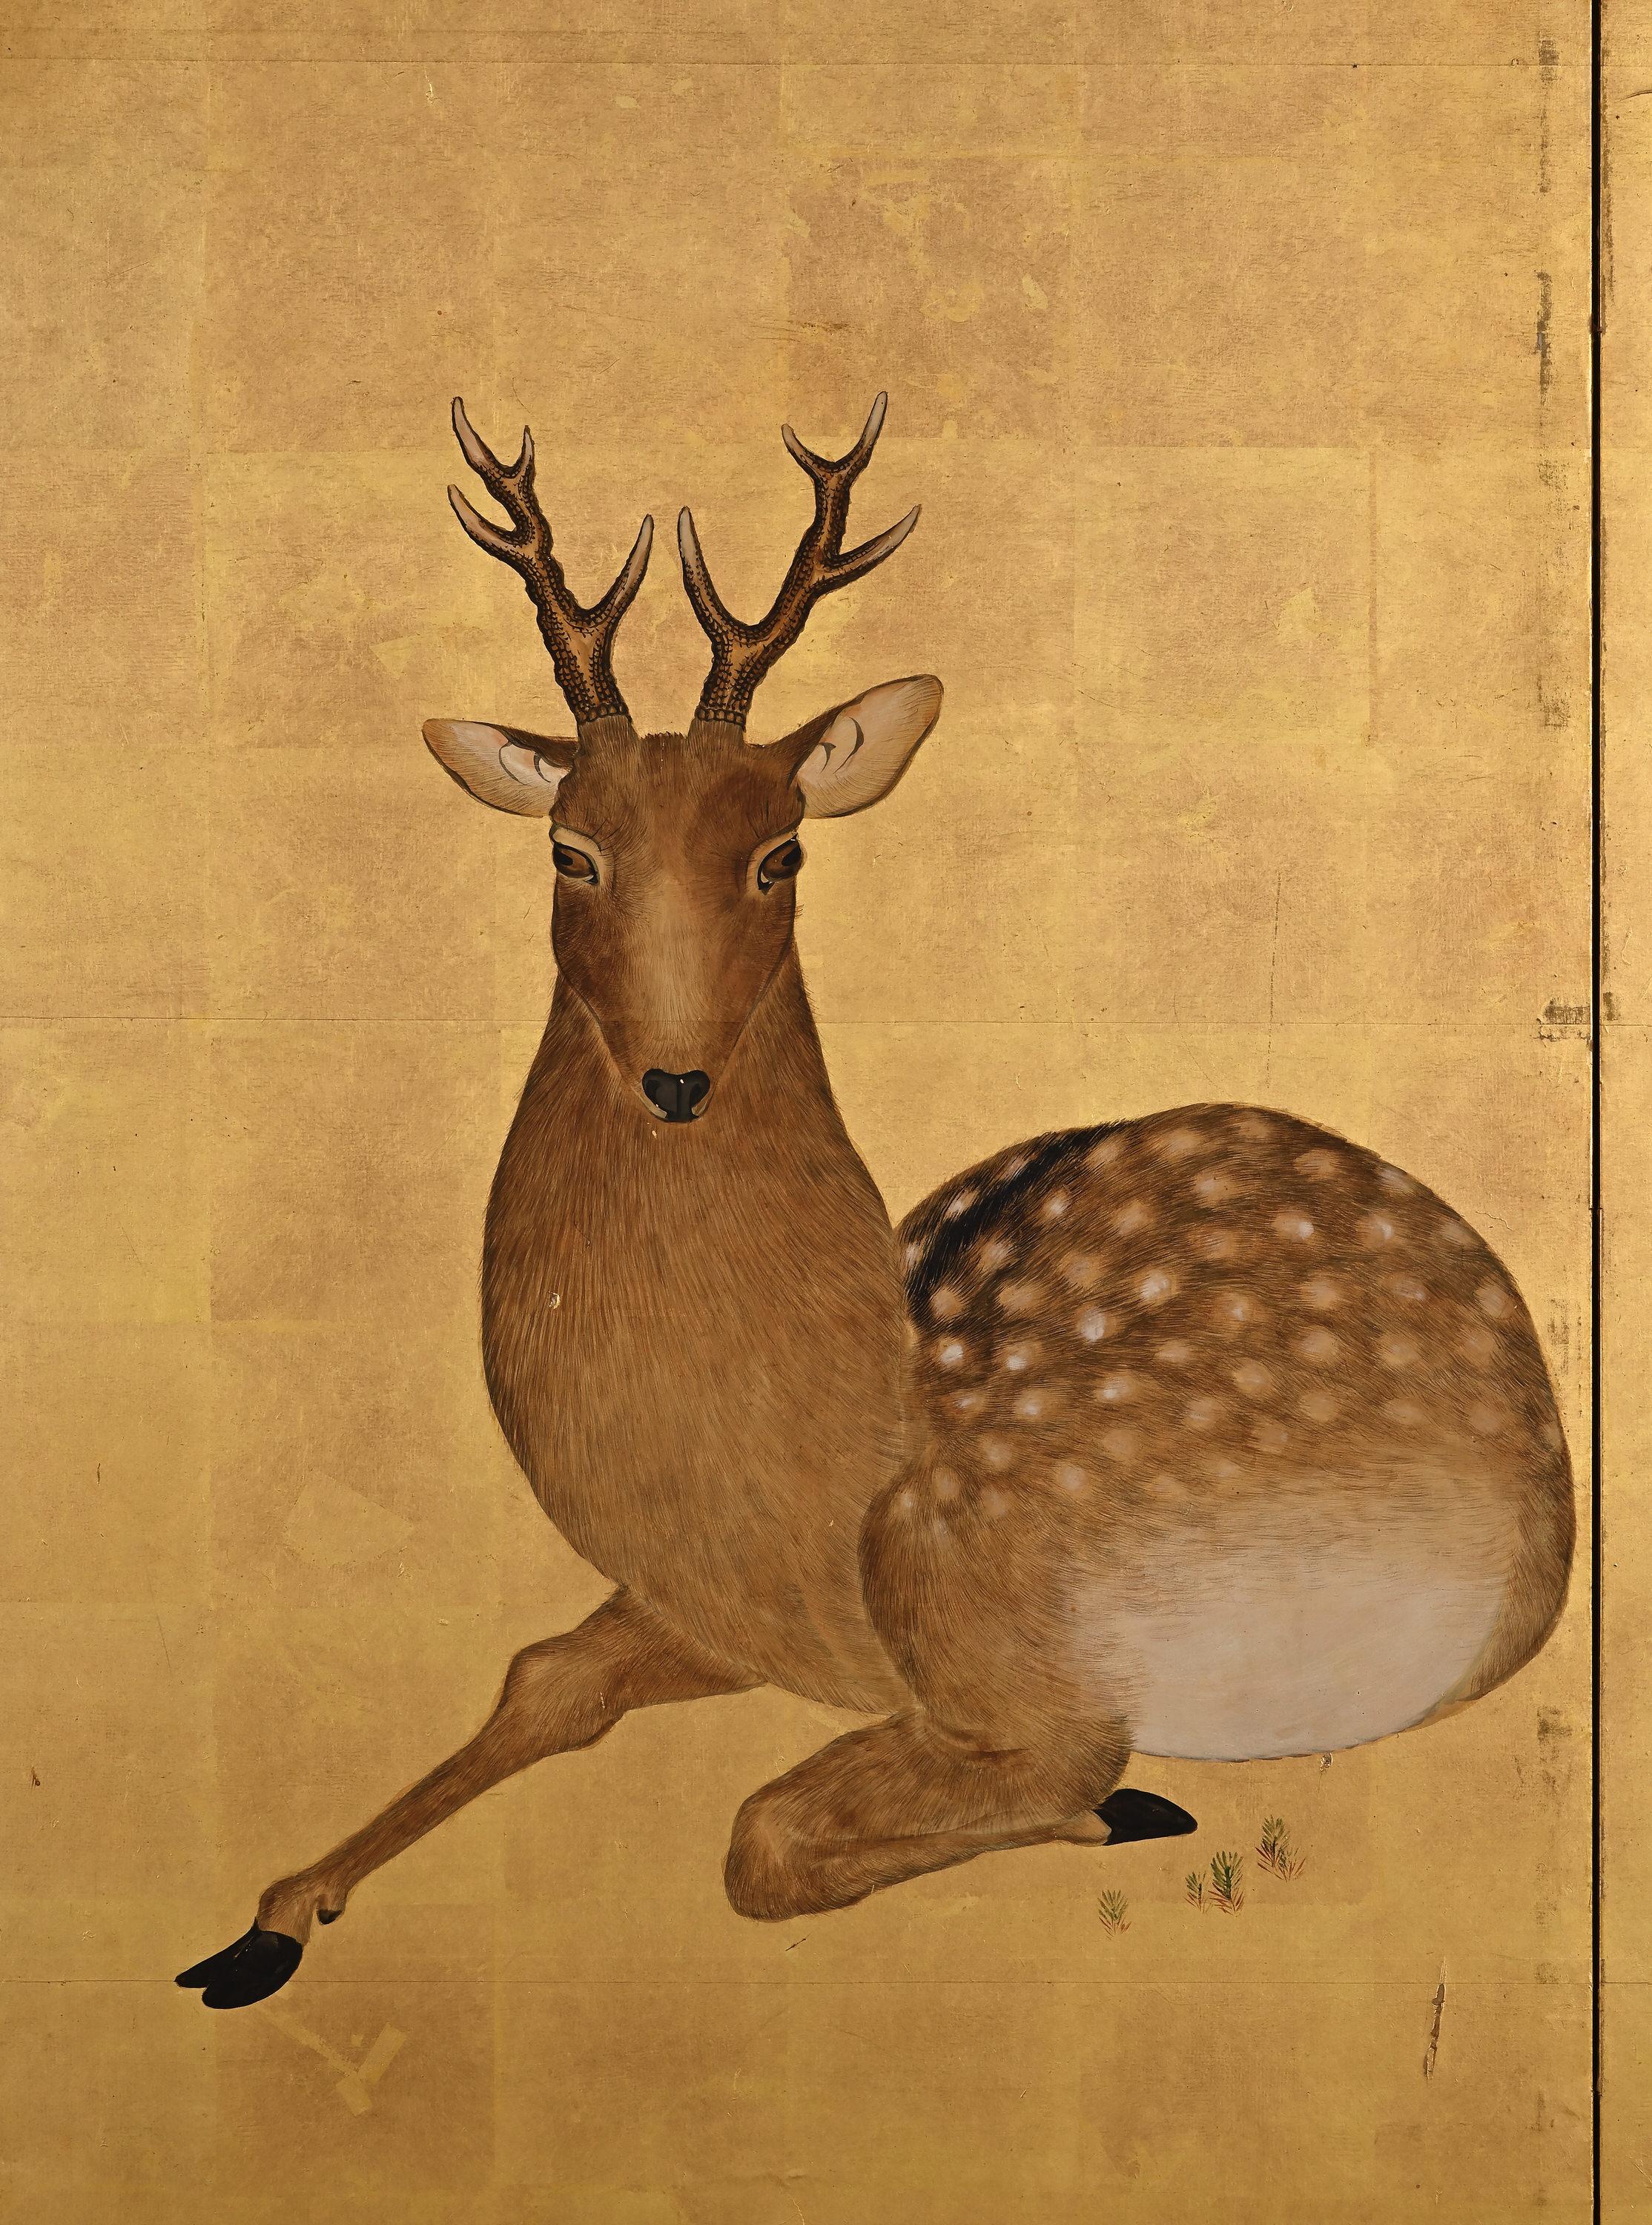 A six-panel Japanese folding screen from the leading Maruyama-Shijo artist Okamoto Toyohiko (1773-1845). Simply featuring three deer and a few sprigs of foliage on a sumptuous gold-leaf background this work emphasizes naturalistic expression and a